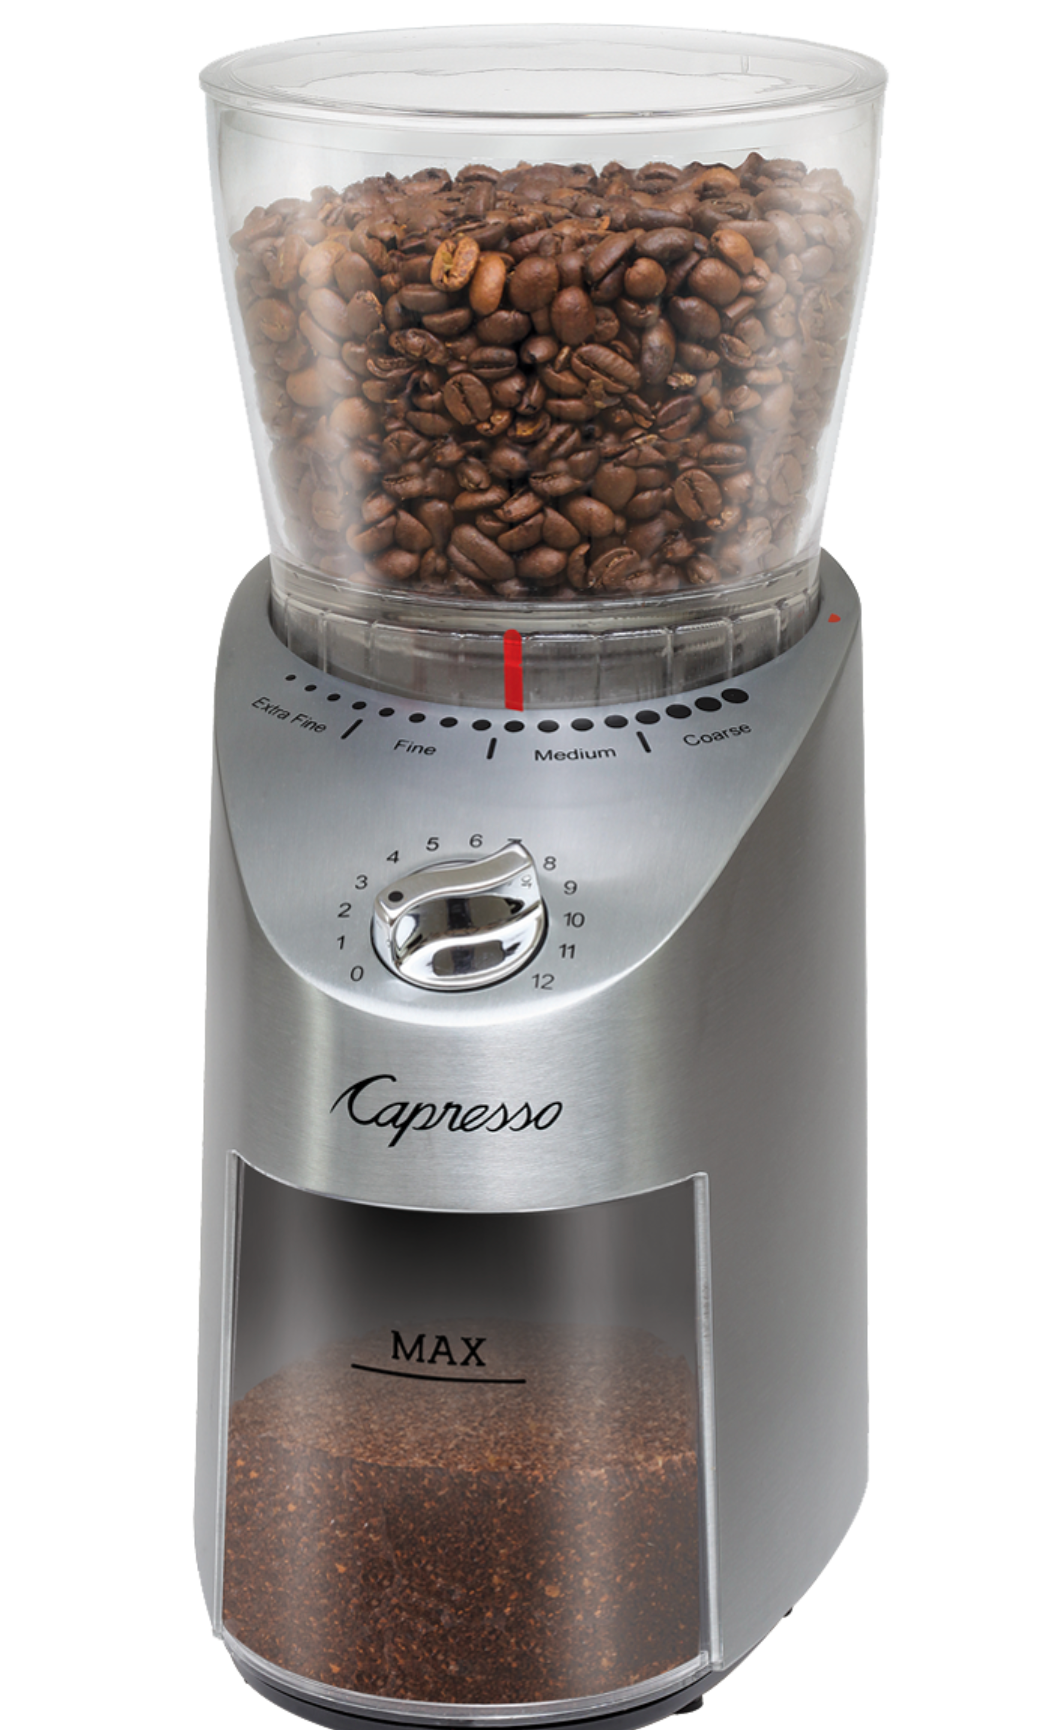 Capresso Infinity Conical Burr Grinder, Baristas burr before brewing. You  can, too, with our recommended Capresso Infinity Conical Burr Coffee Grinder.  Burr grinders are the norm in the coffee